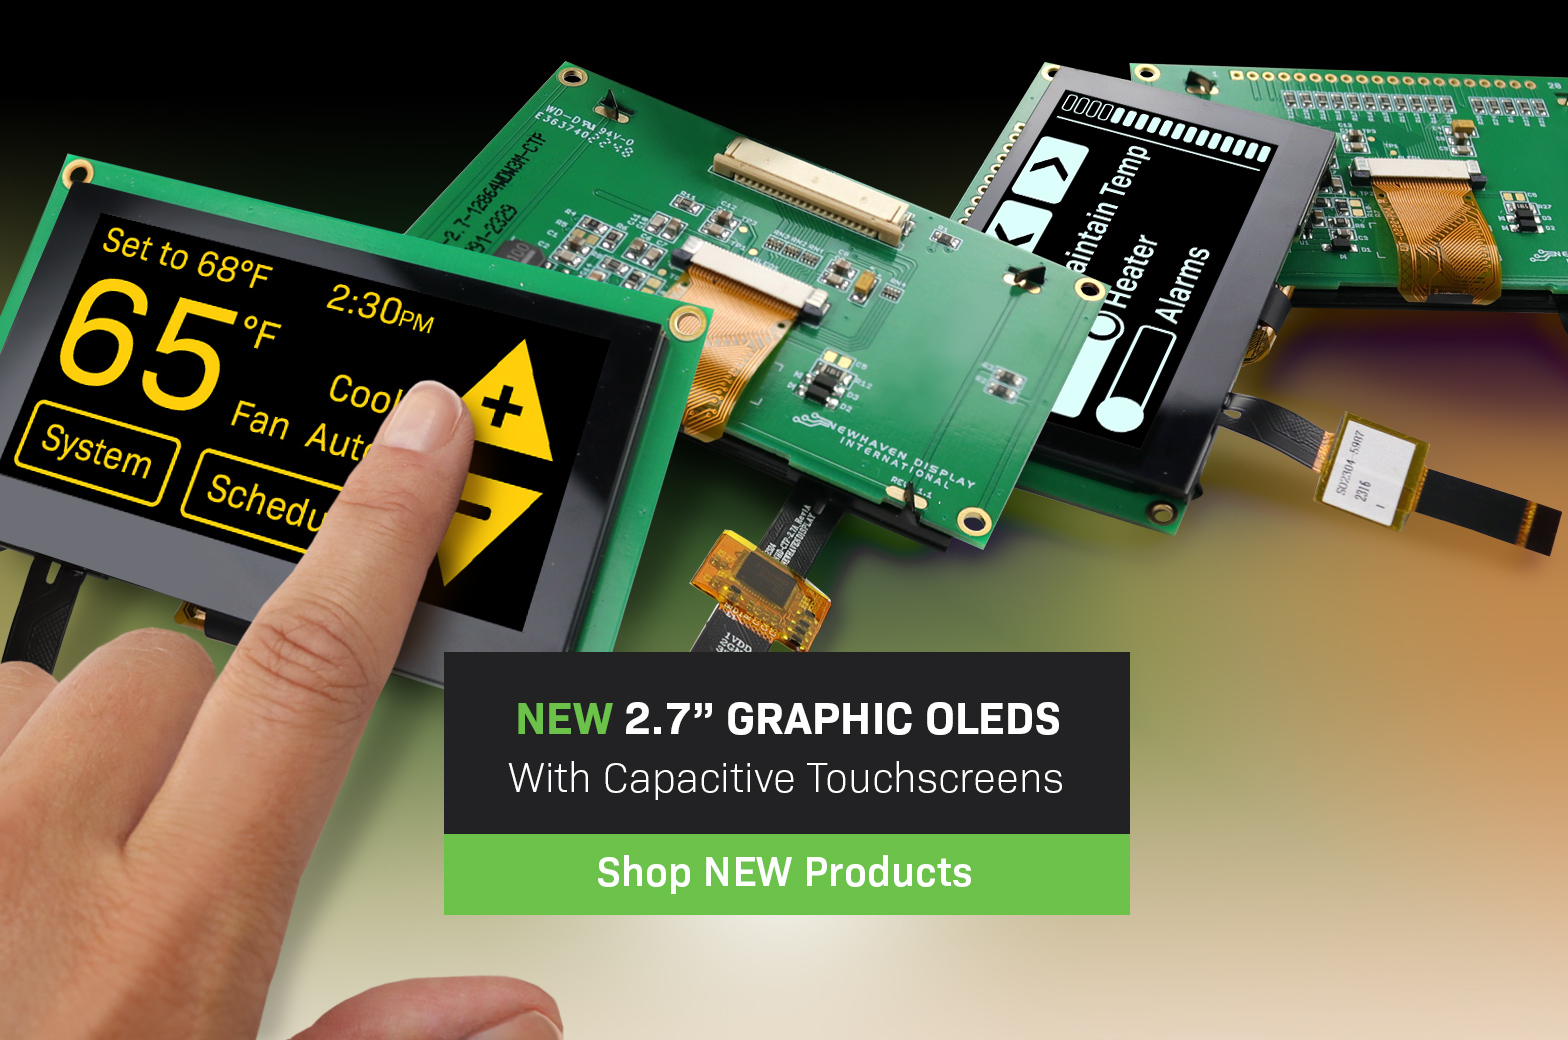 New 2.7" Graphic OLEDs with Capacitive Touchscreen